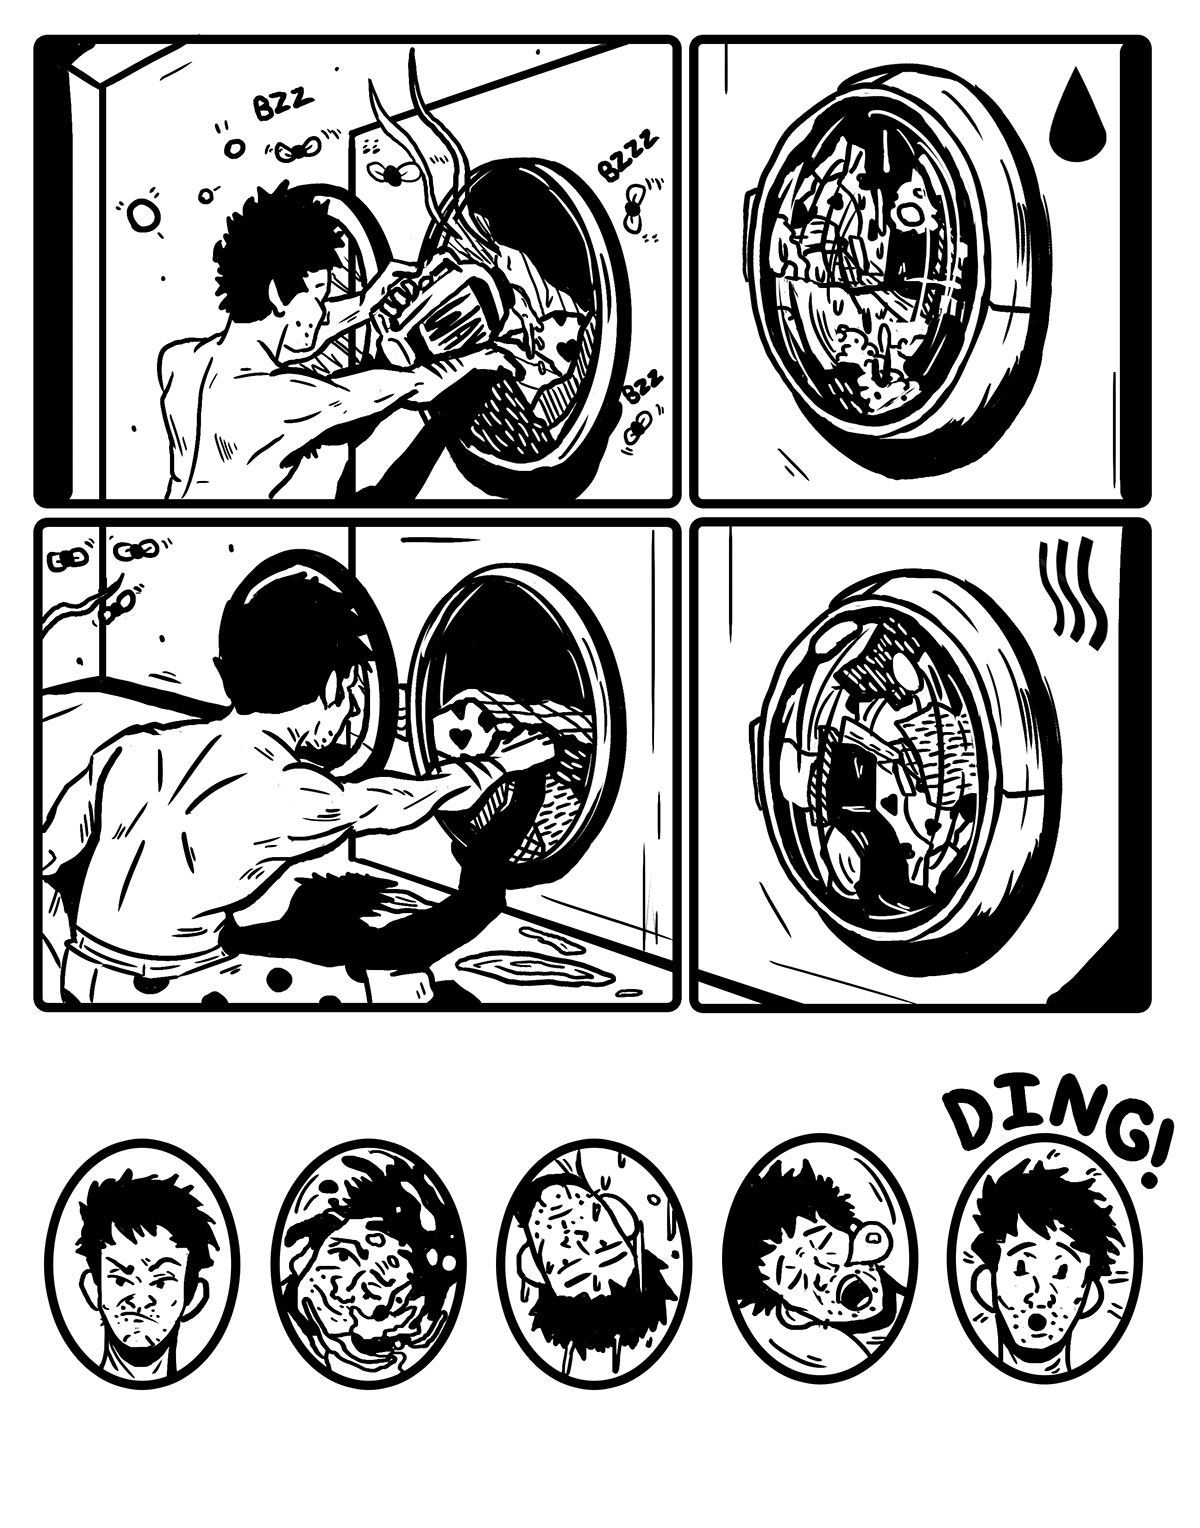 laundry laundry day comic black and white smelly funny humerous tale